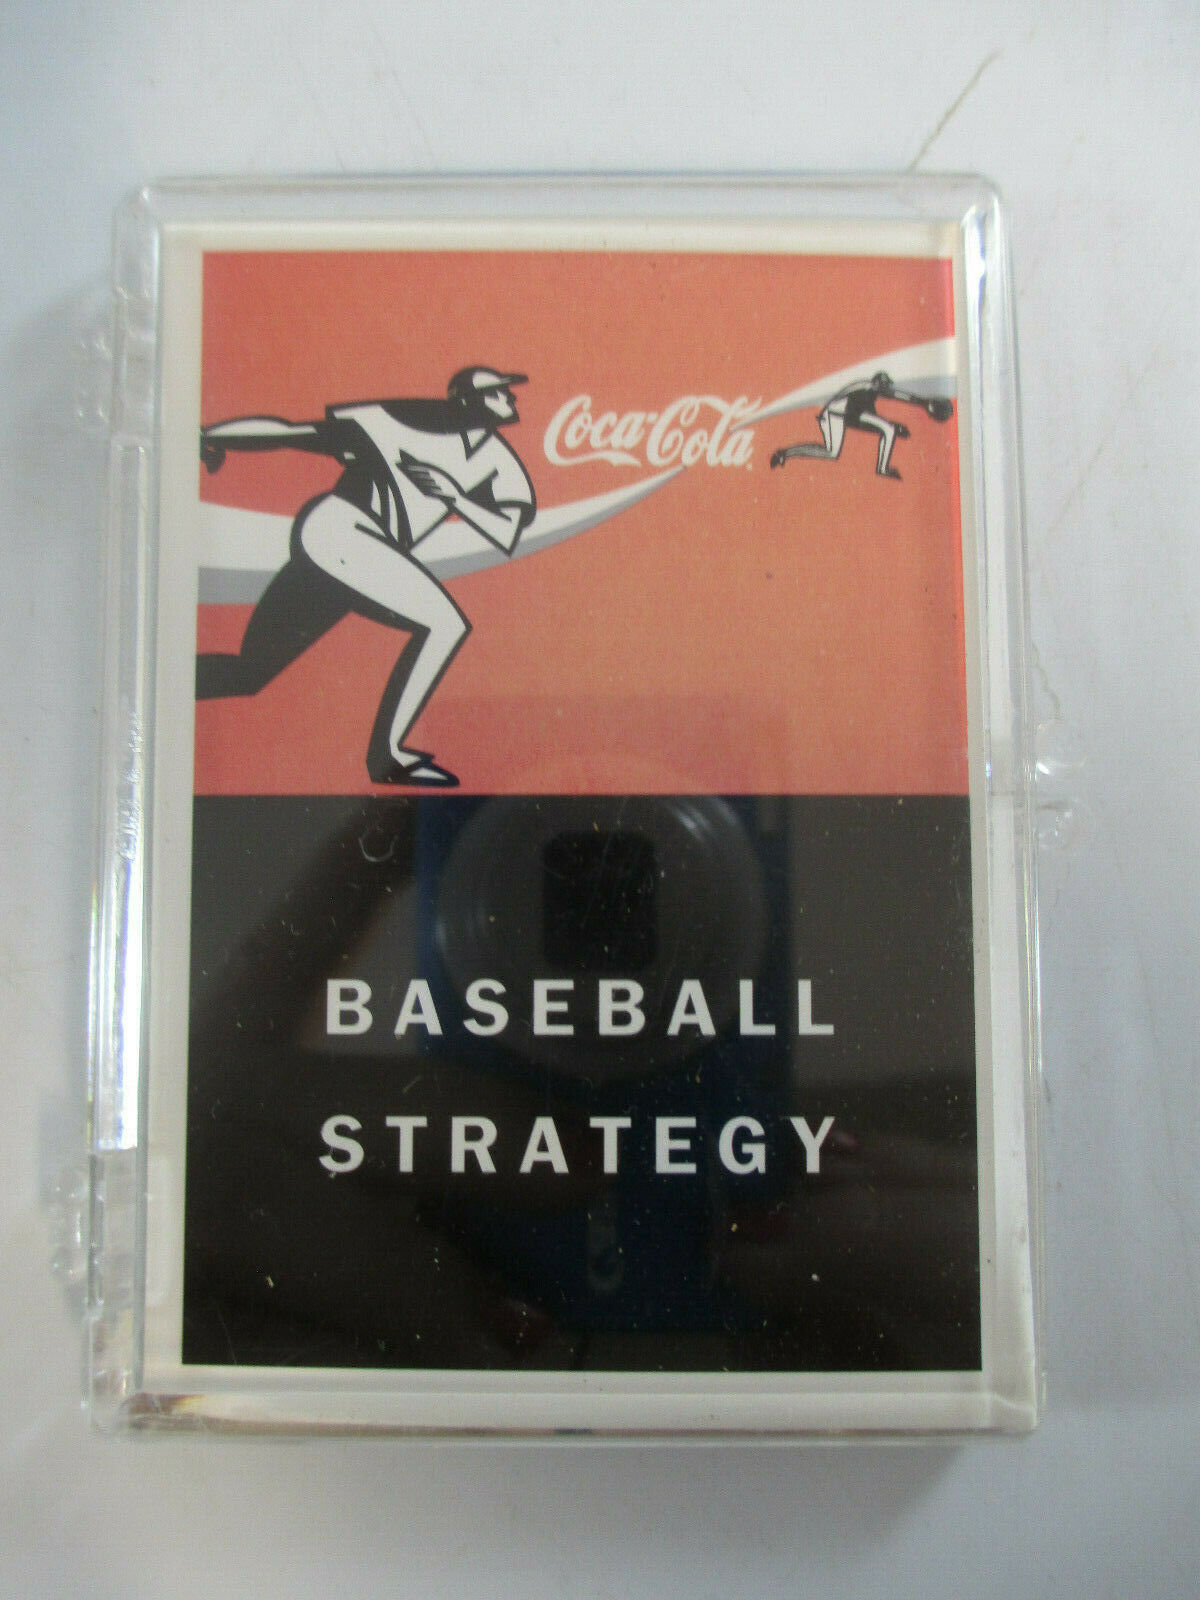 Primary image for Coca-Cola Baseball Strategy Marketing Materials Cards 1990s